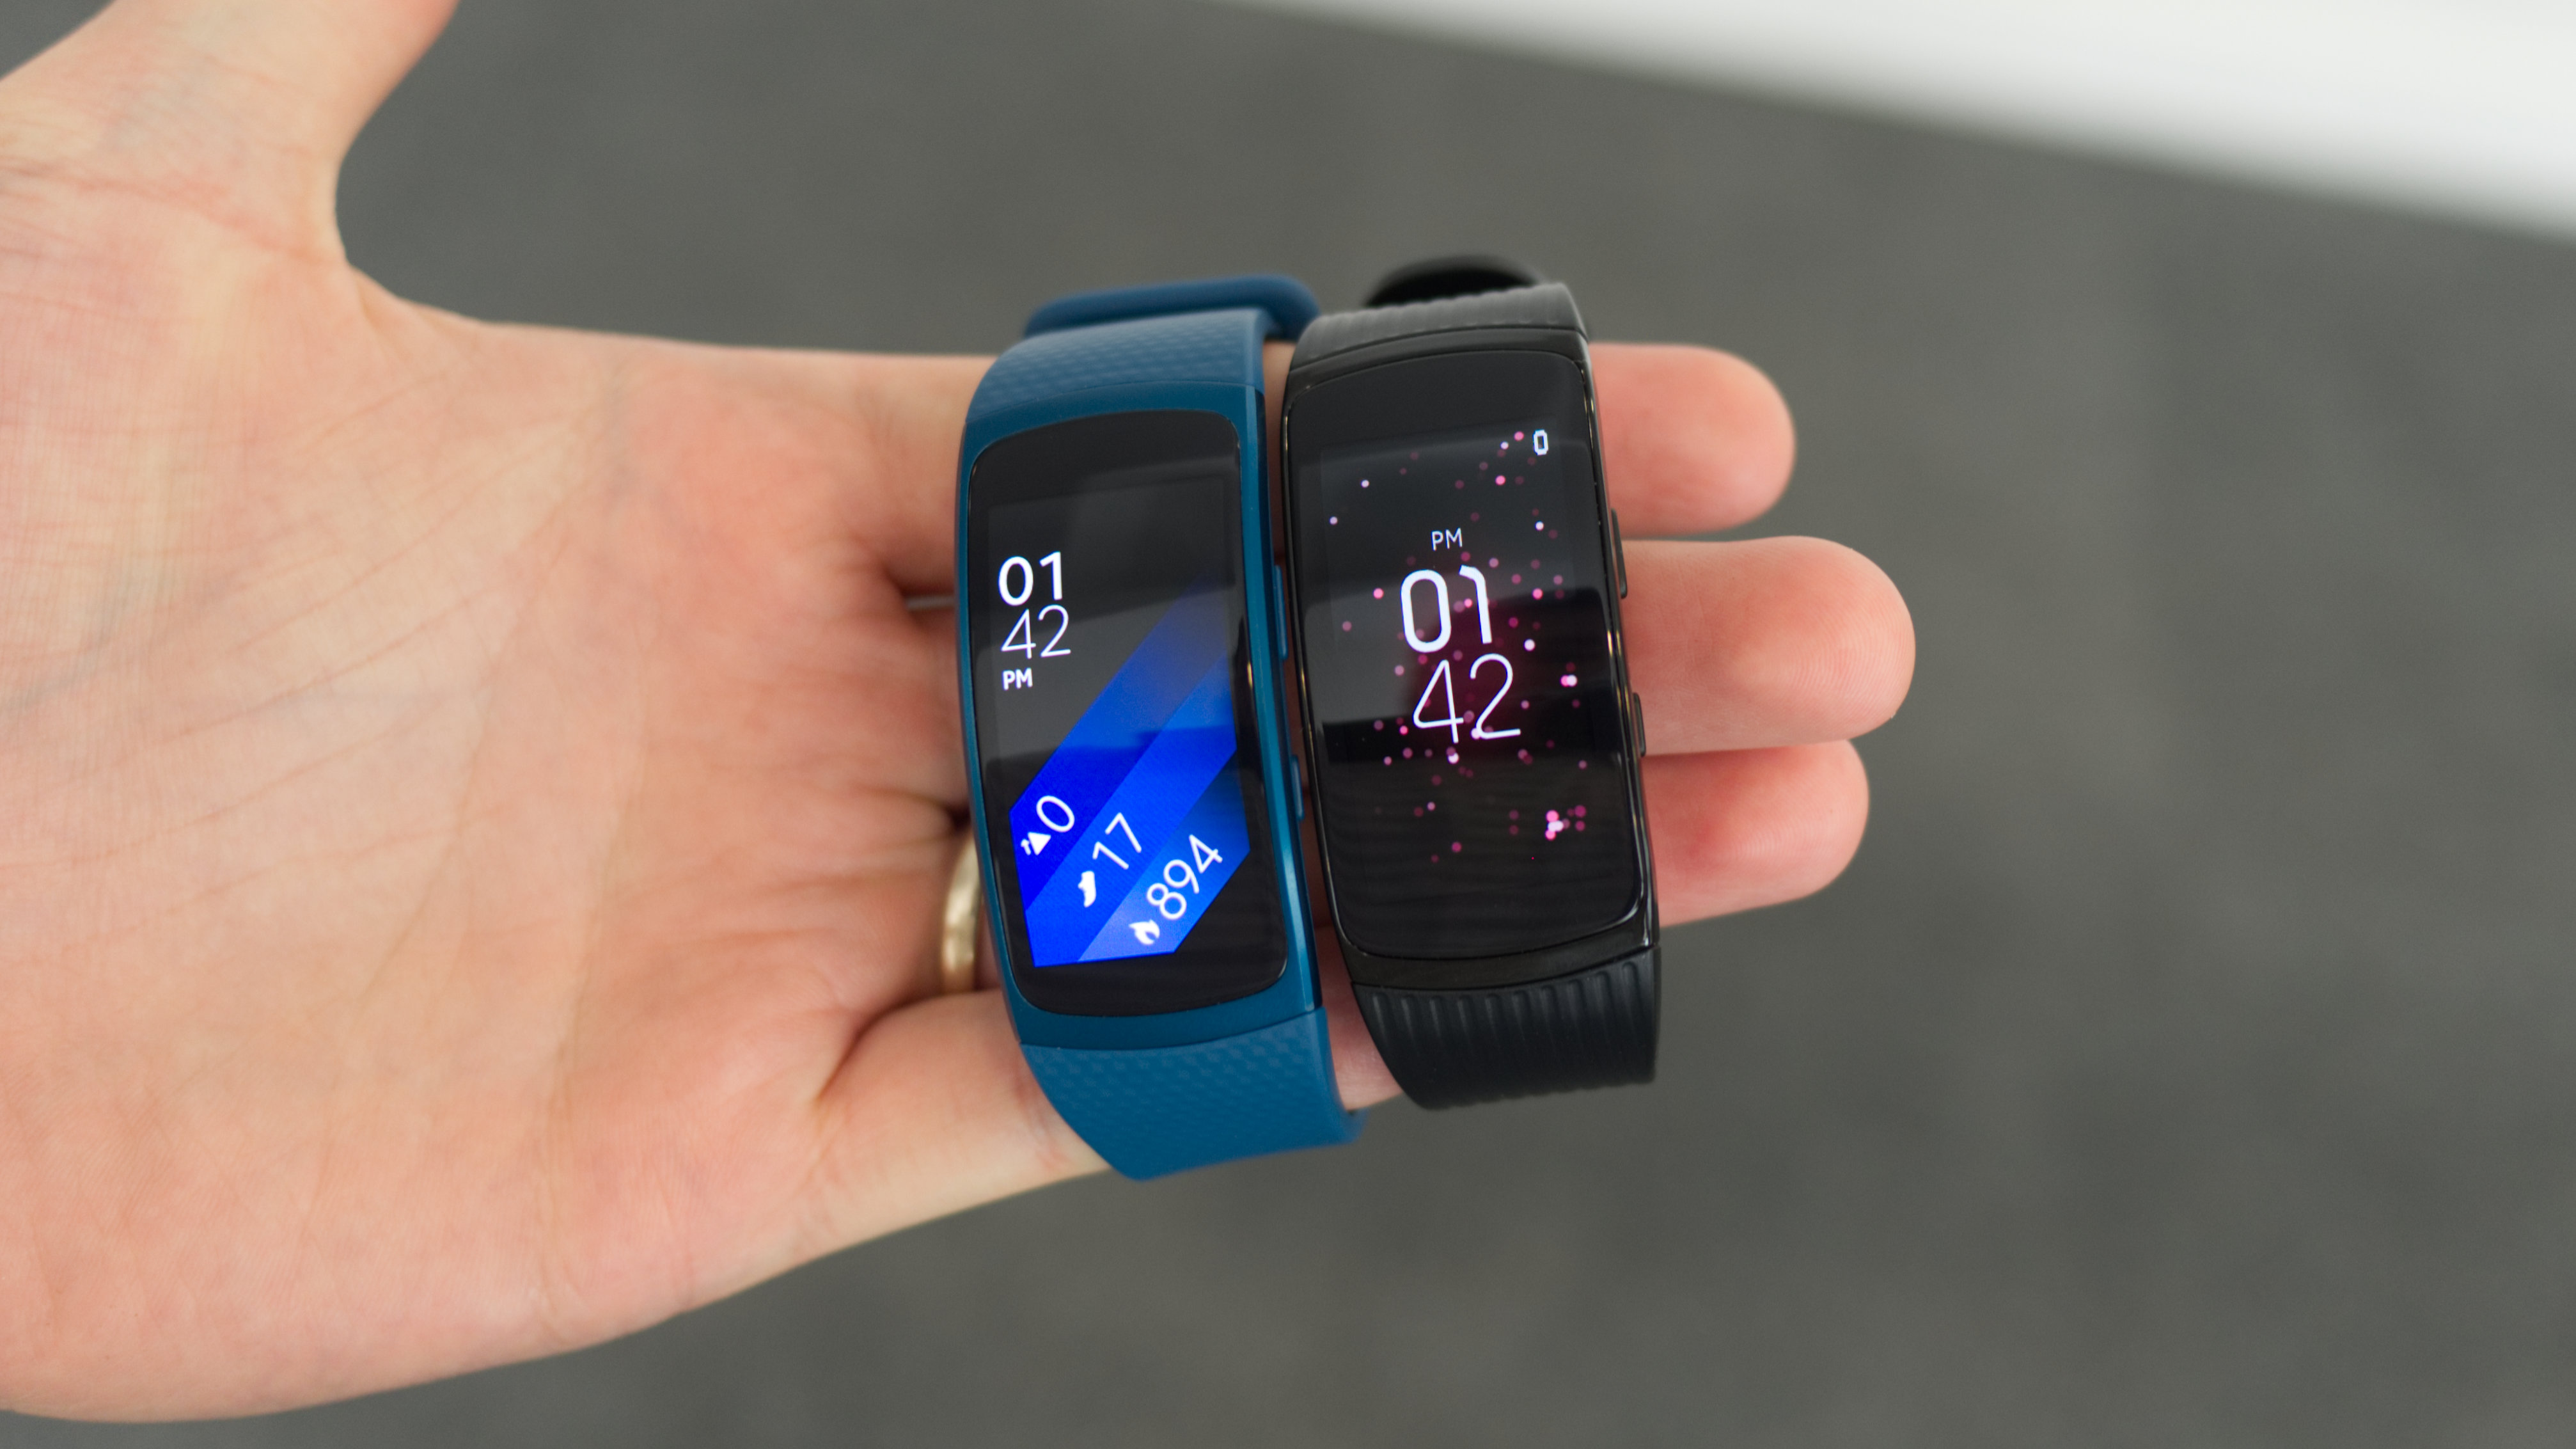 Samsung Gear Fit 2 review: Samsung gets fitness tracking right | The Verge